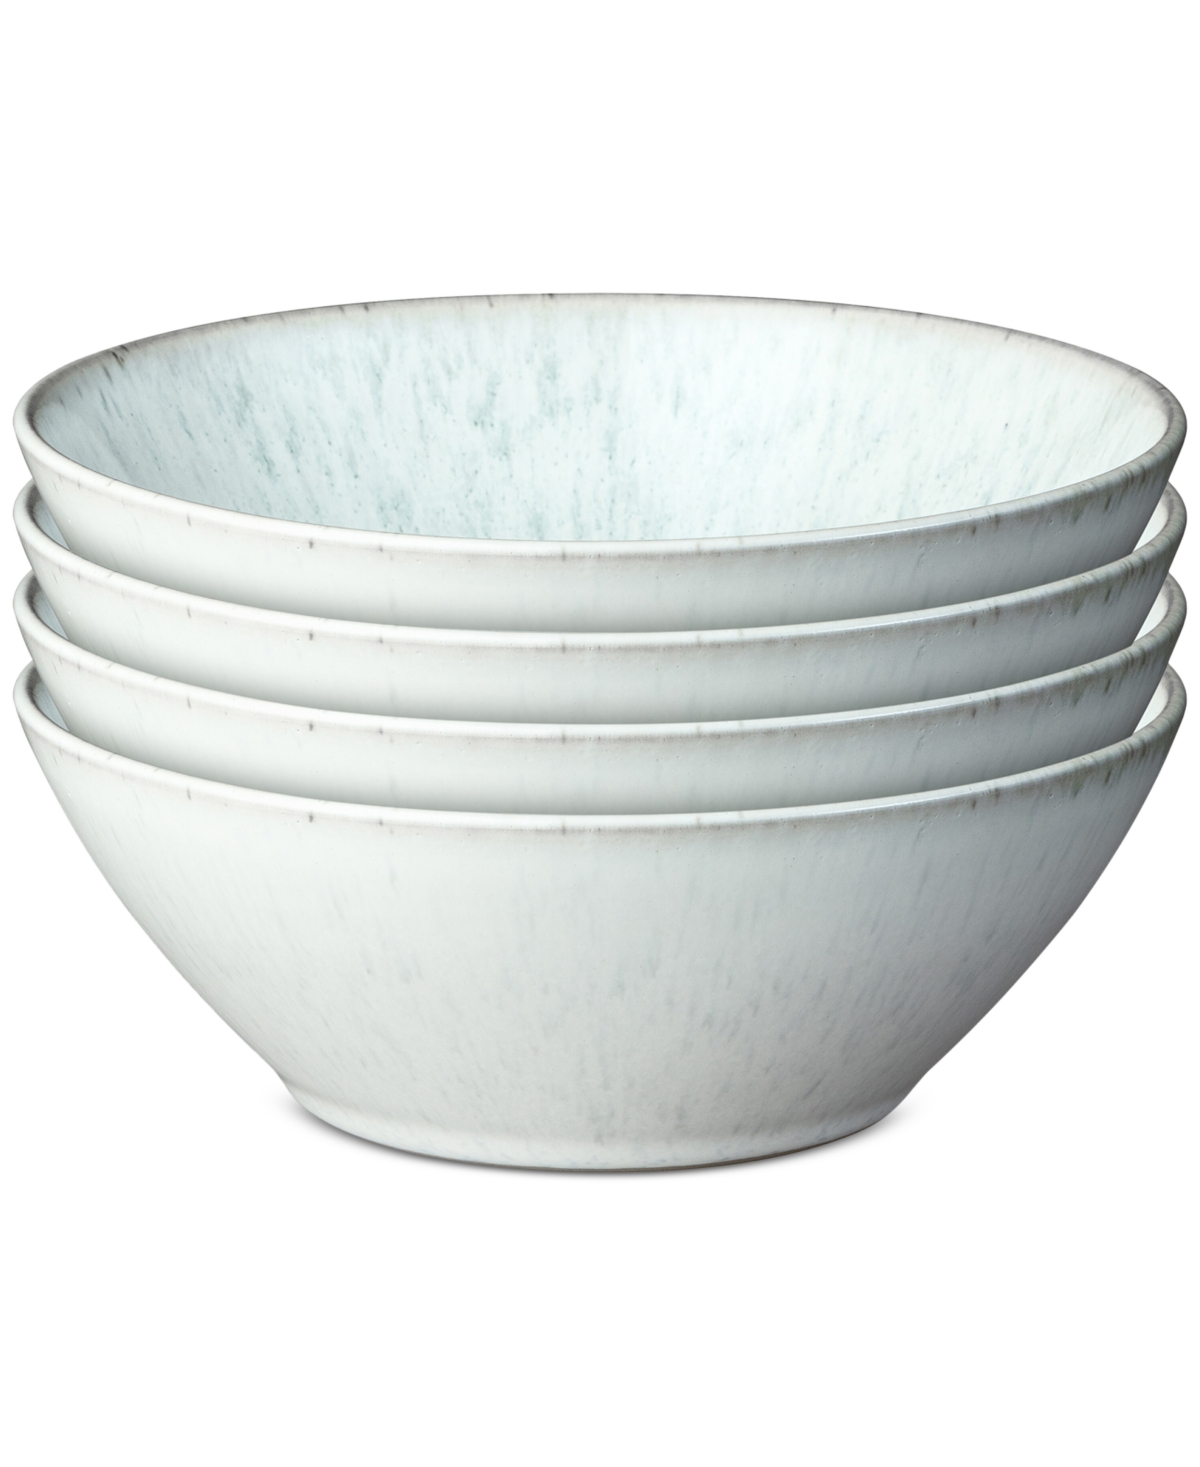 Kiln Collection Stoneware Cereal Bowls, Set Of 4 - Blue